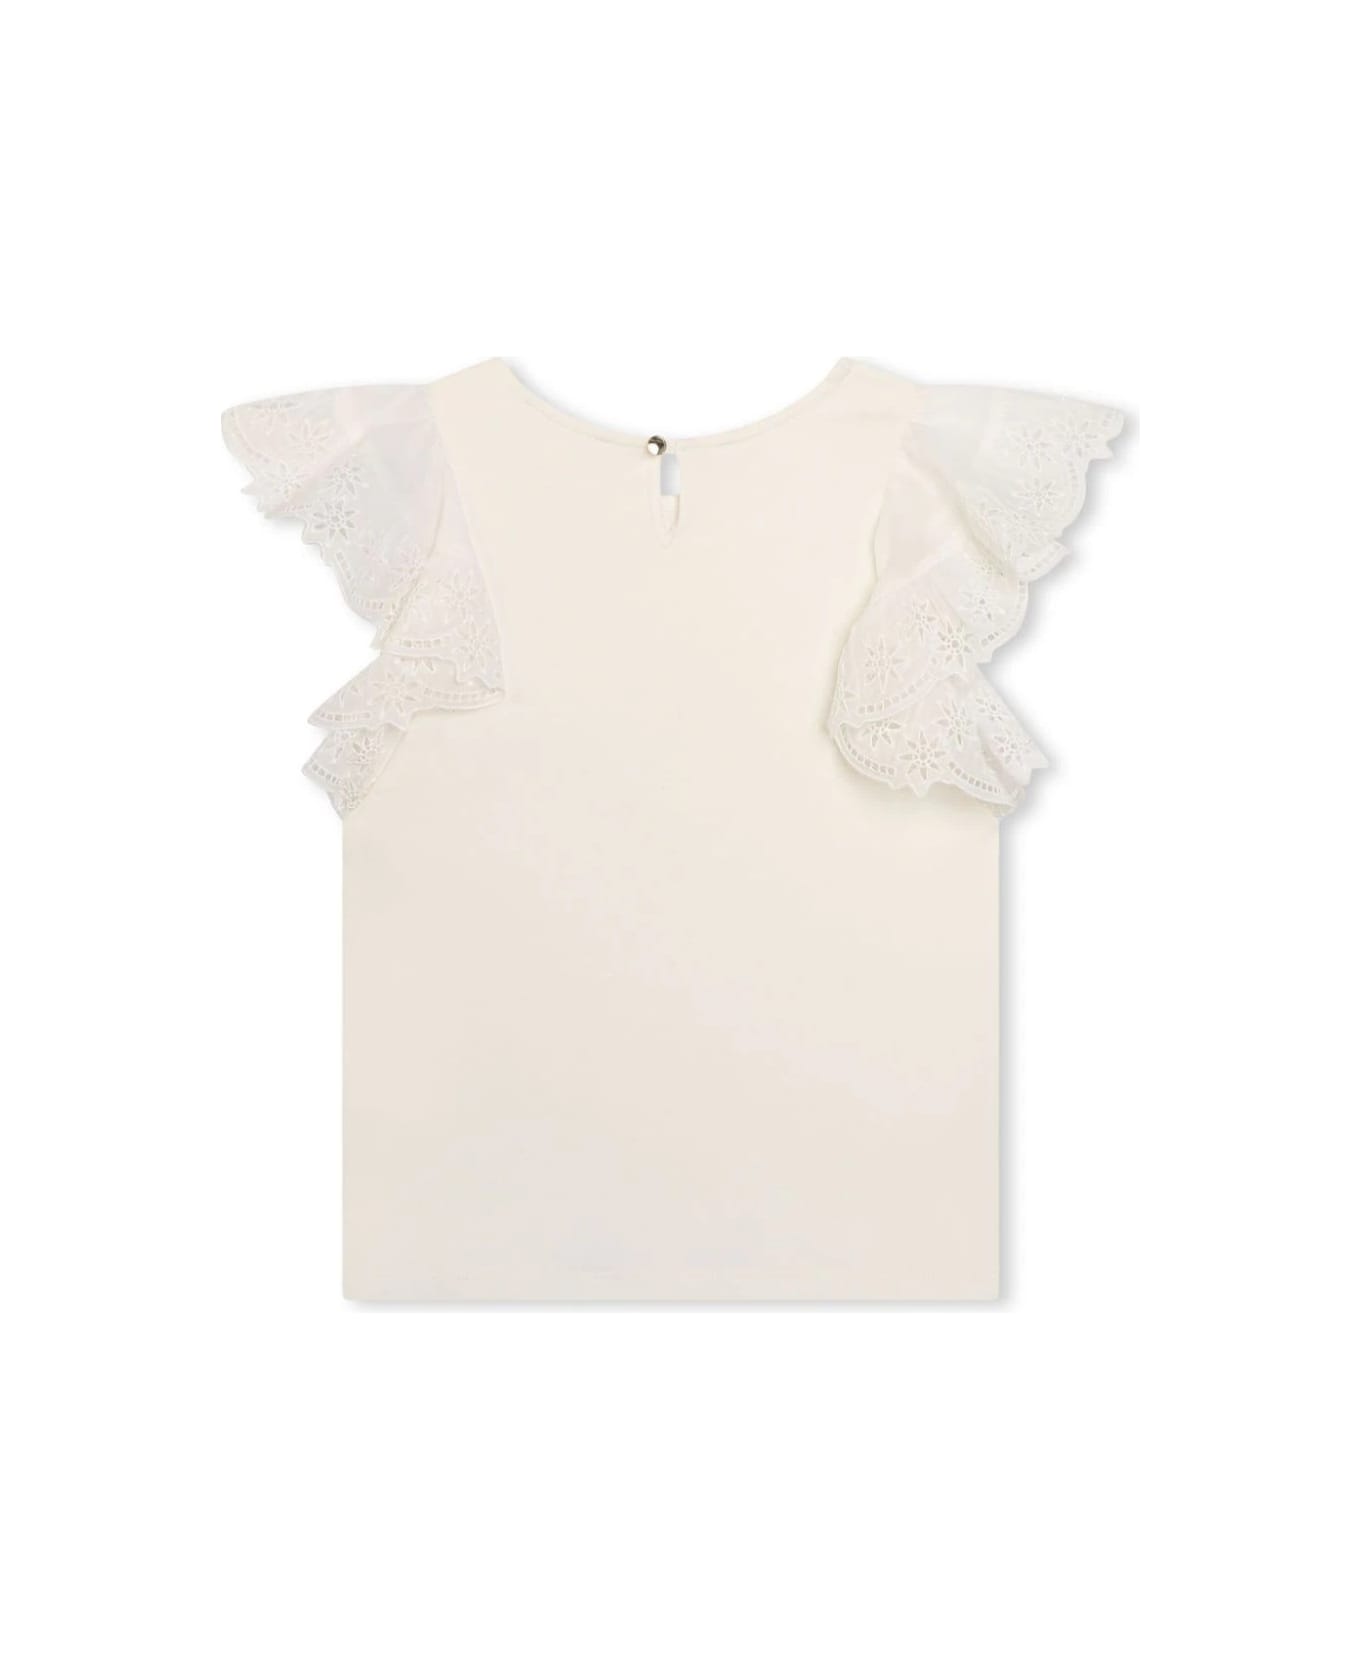 Chloé White Top With Embroidered Ruffles - Bianco